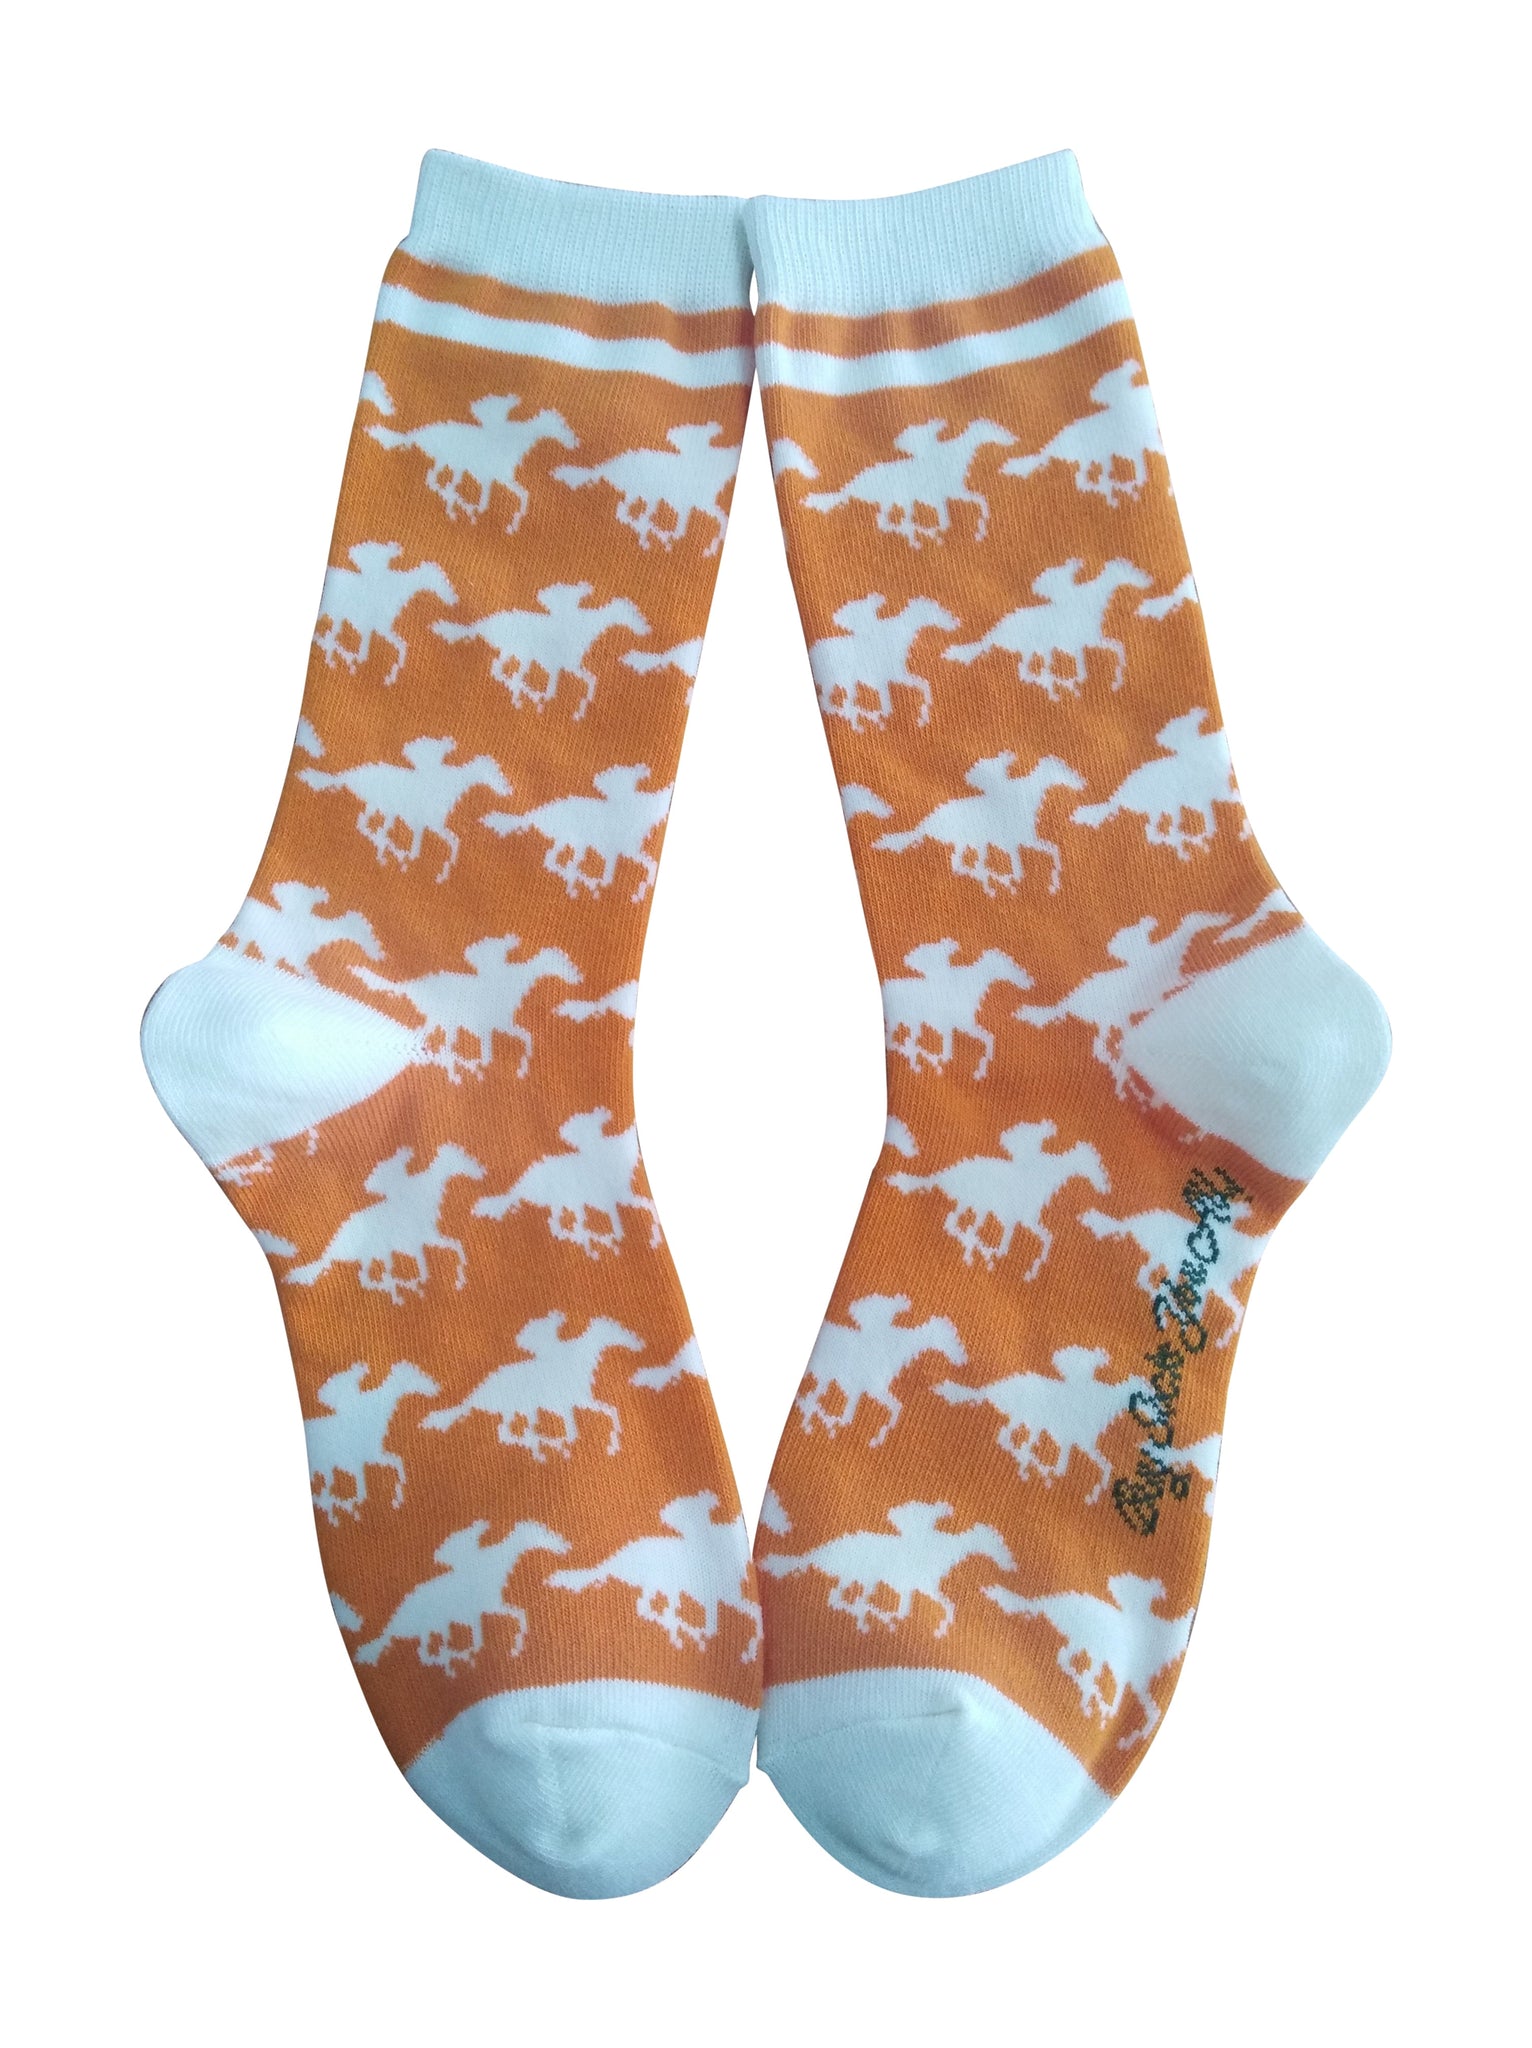 Derby Horses in Orange and White